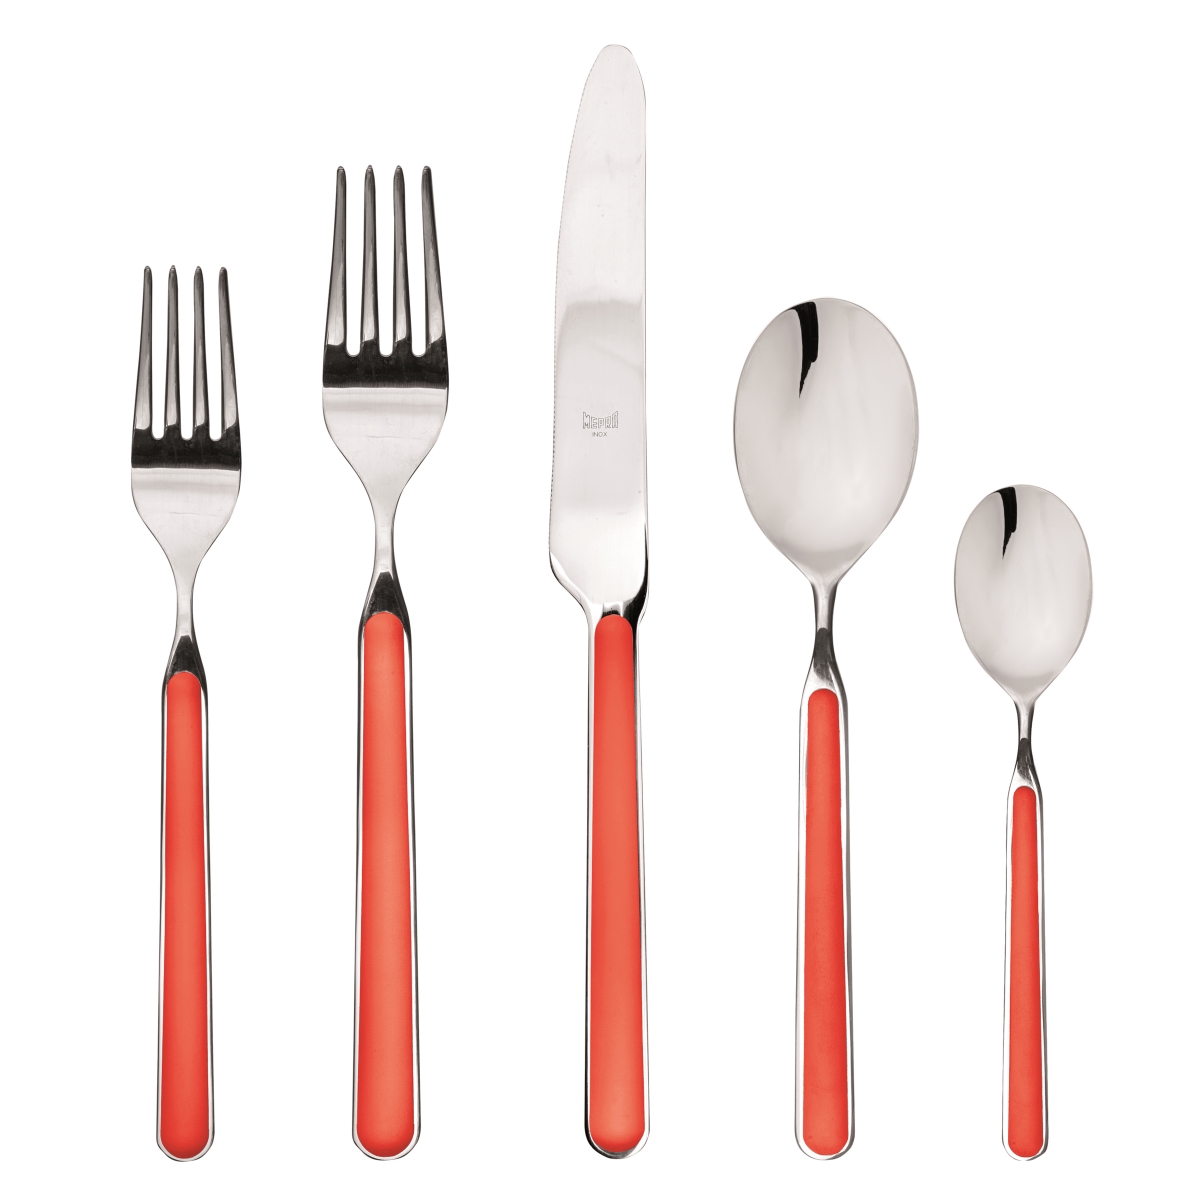 10s722005 Stainless Steel Fantasia Place Set, Red - 5 Piece